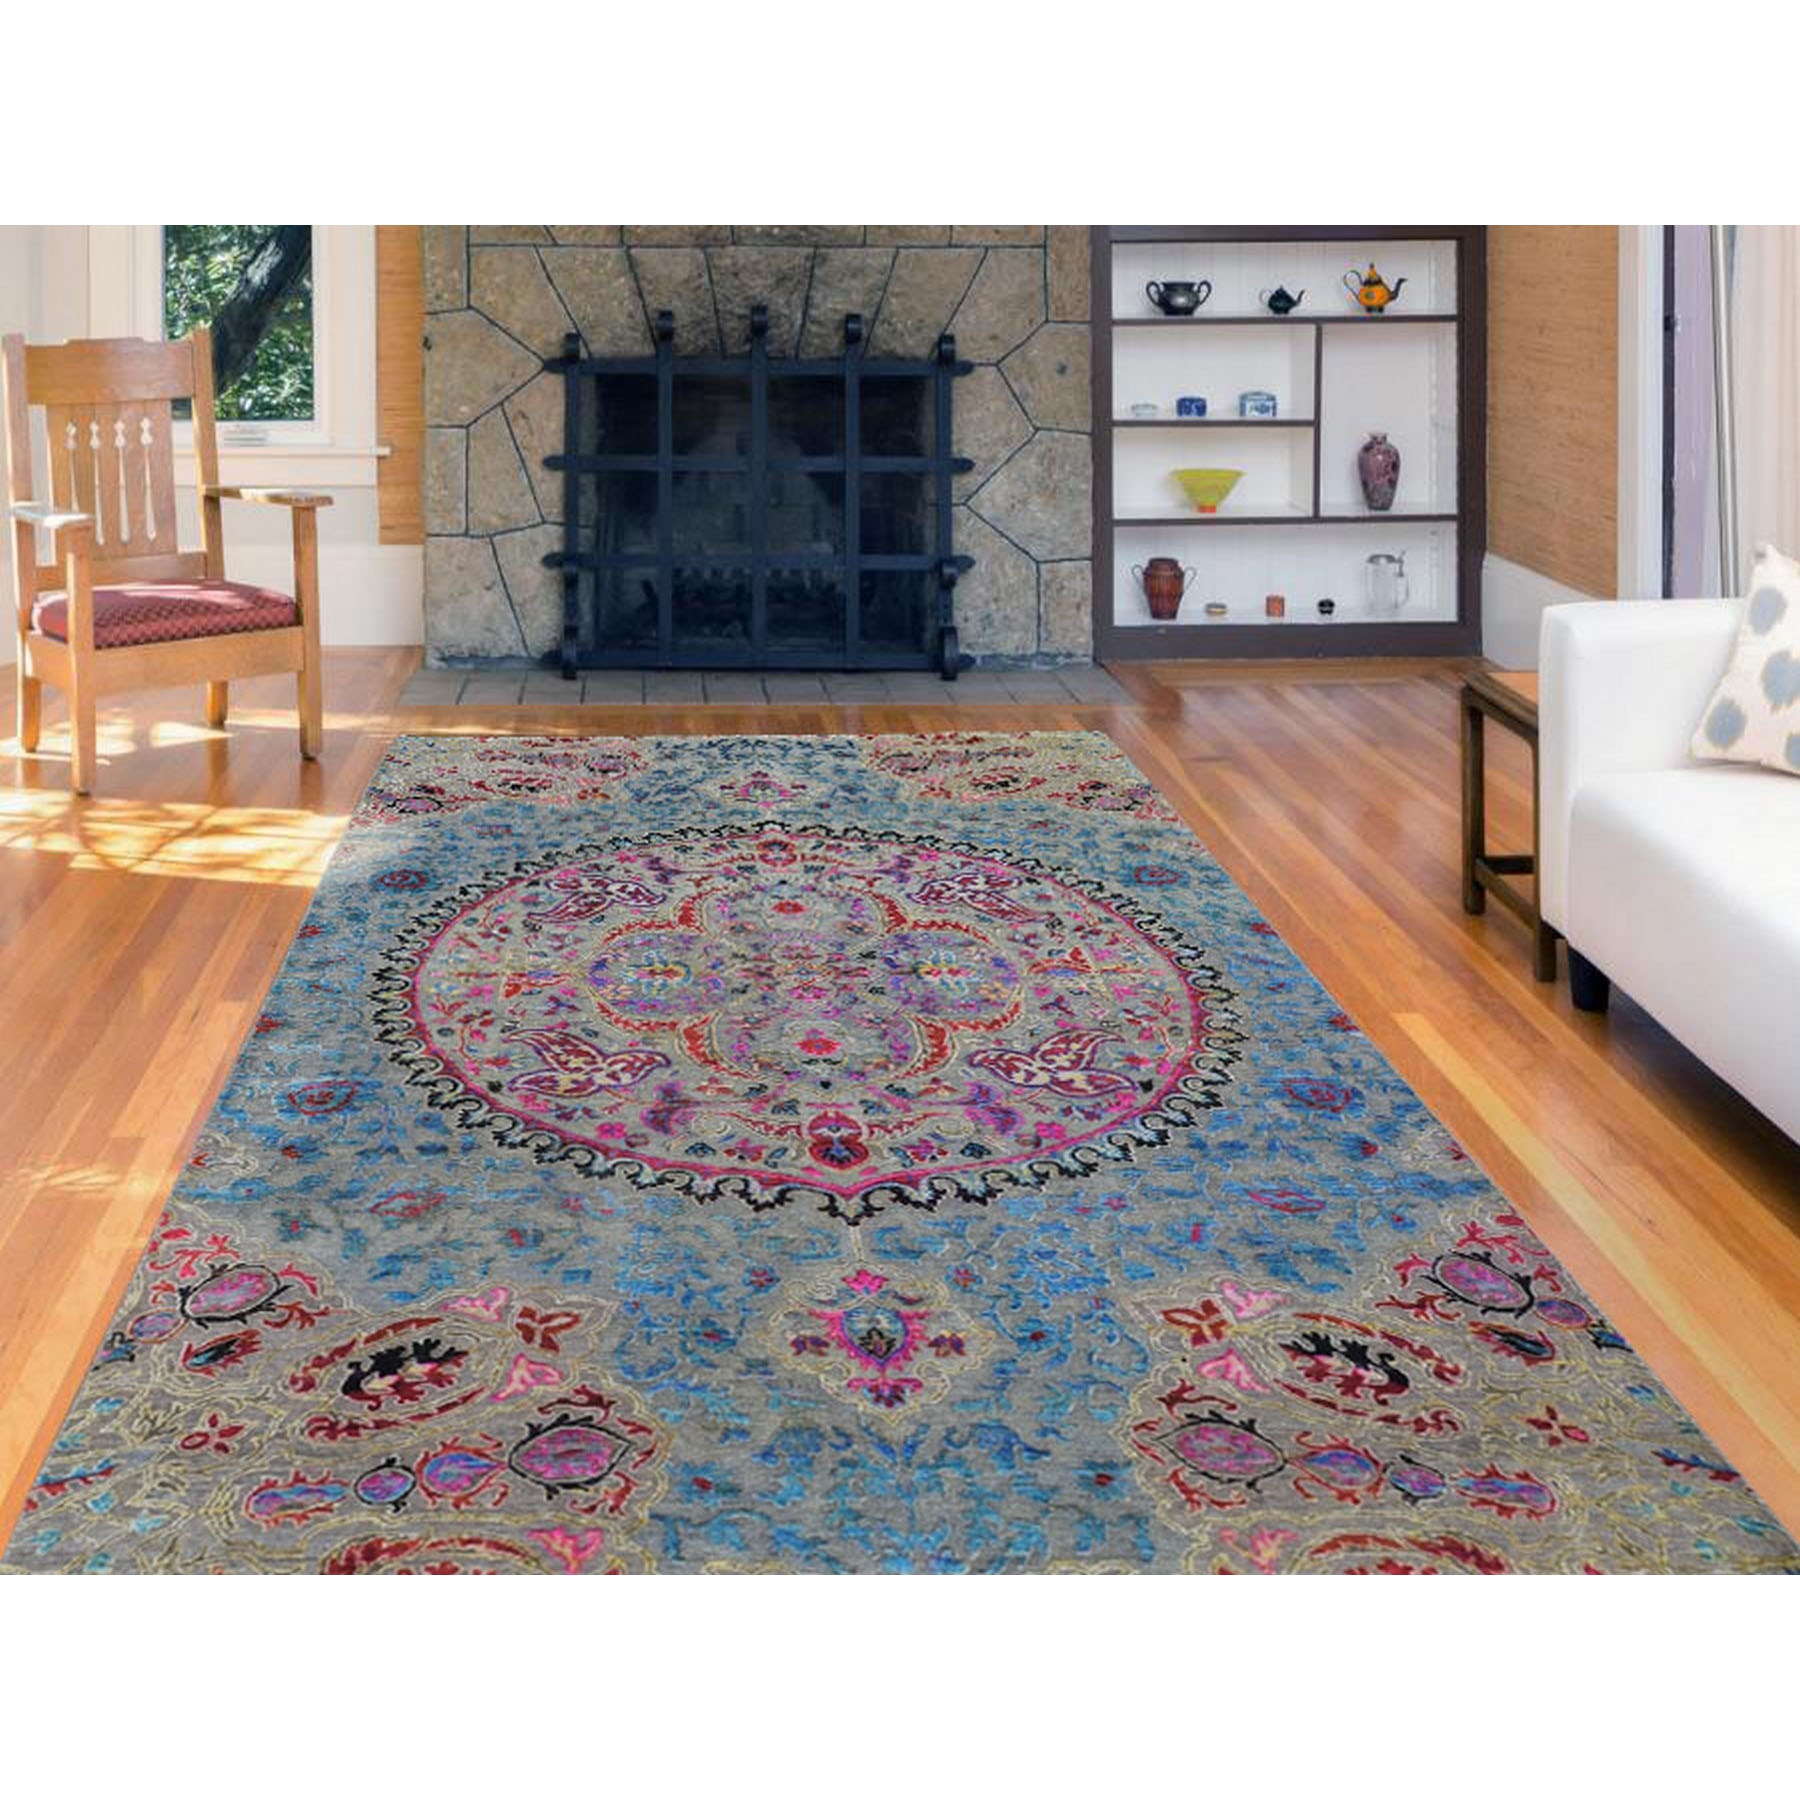 6-x9- Sari Silk and Textured Wool Colorful Maharaja Design Hand Knotted Oriental Rug 